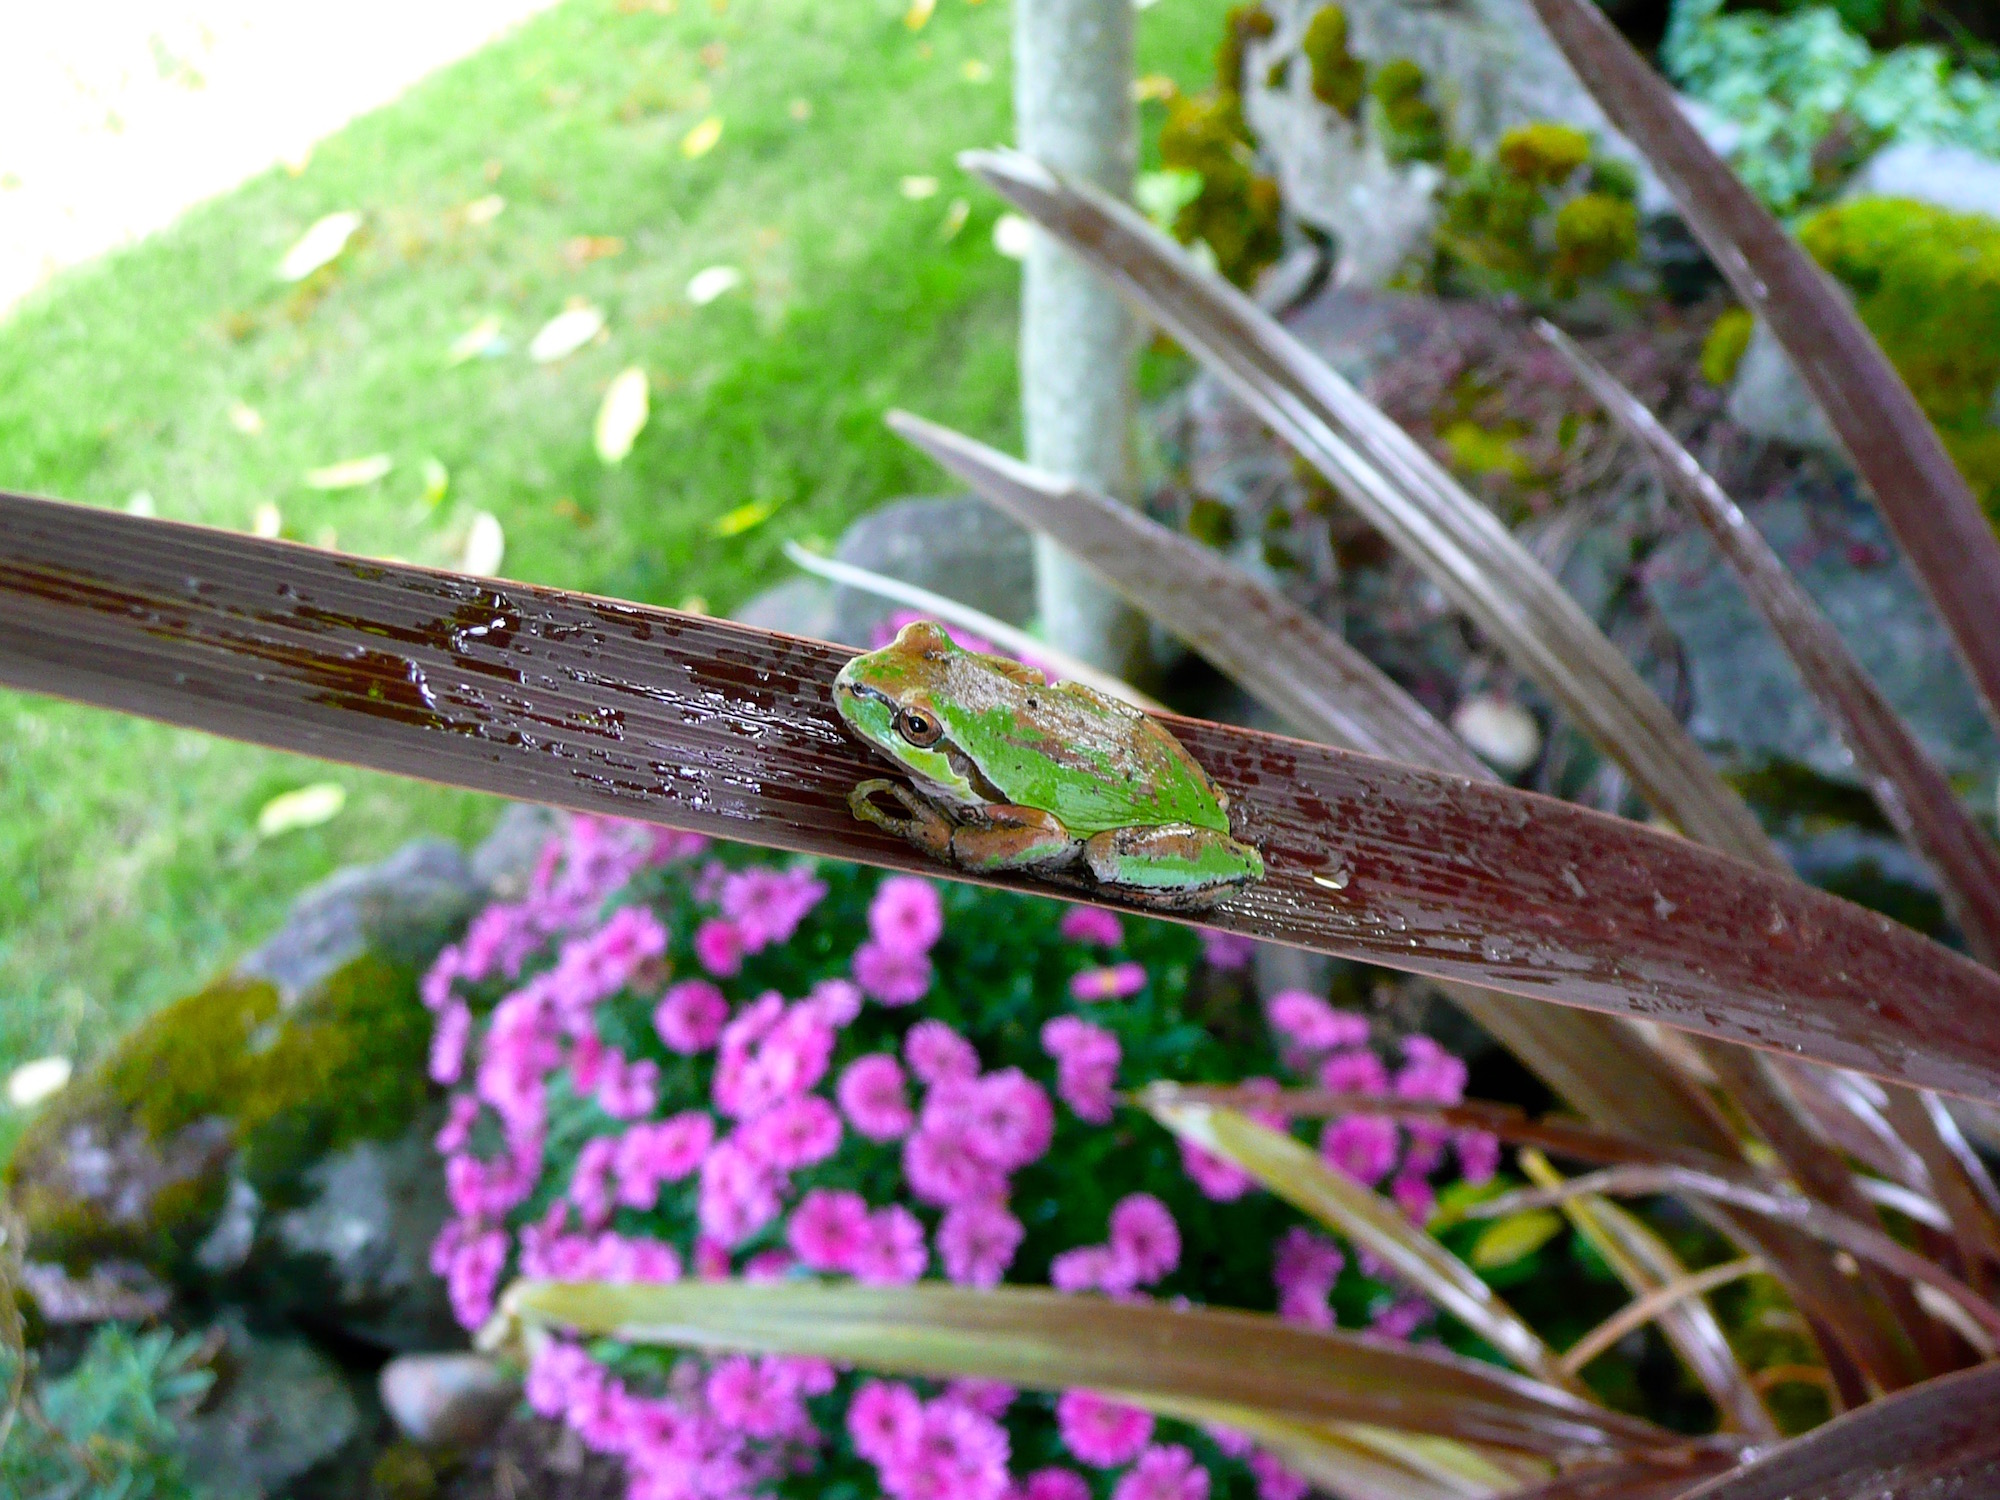 I had just watered my garden and this little tree frog decided to take a breather on my plant. I believe it was possibly morphing from green to brown because of the leaf on which it was resting.